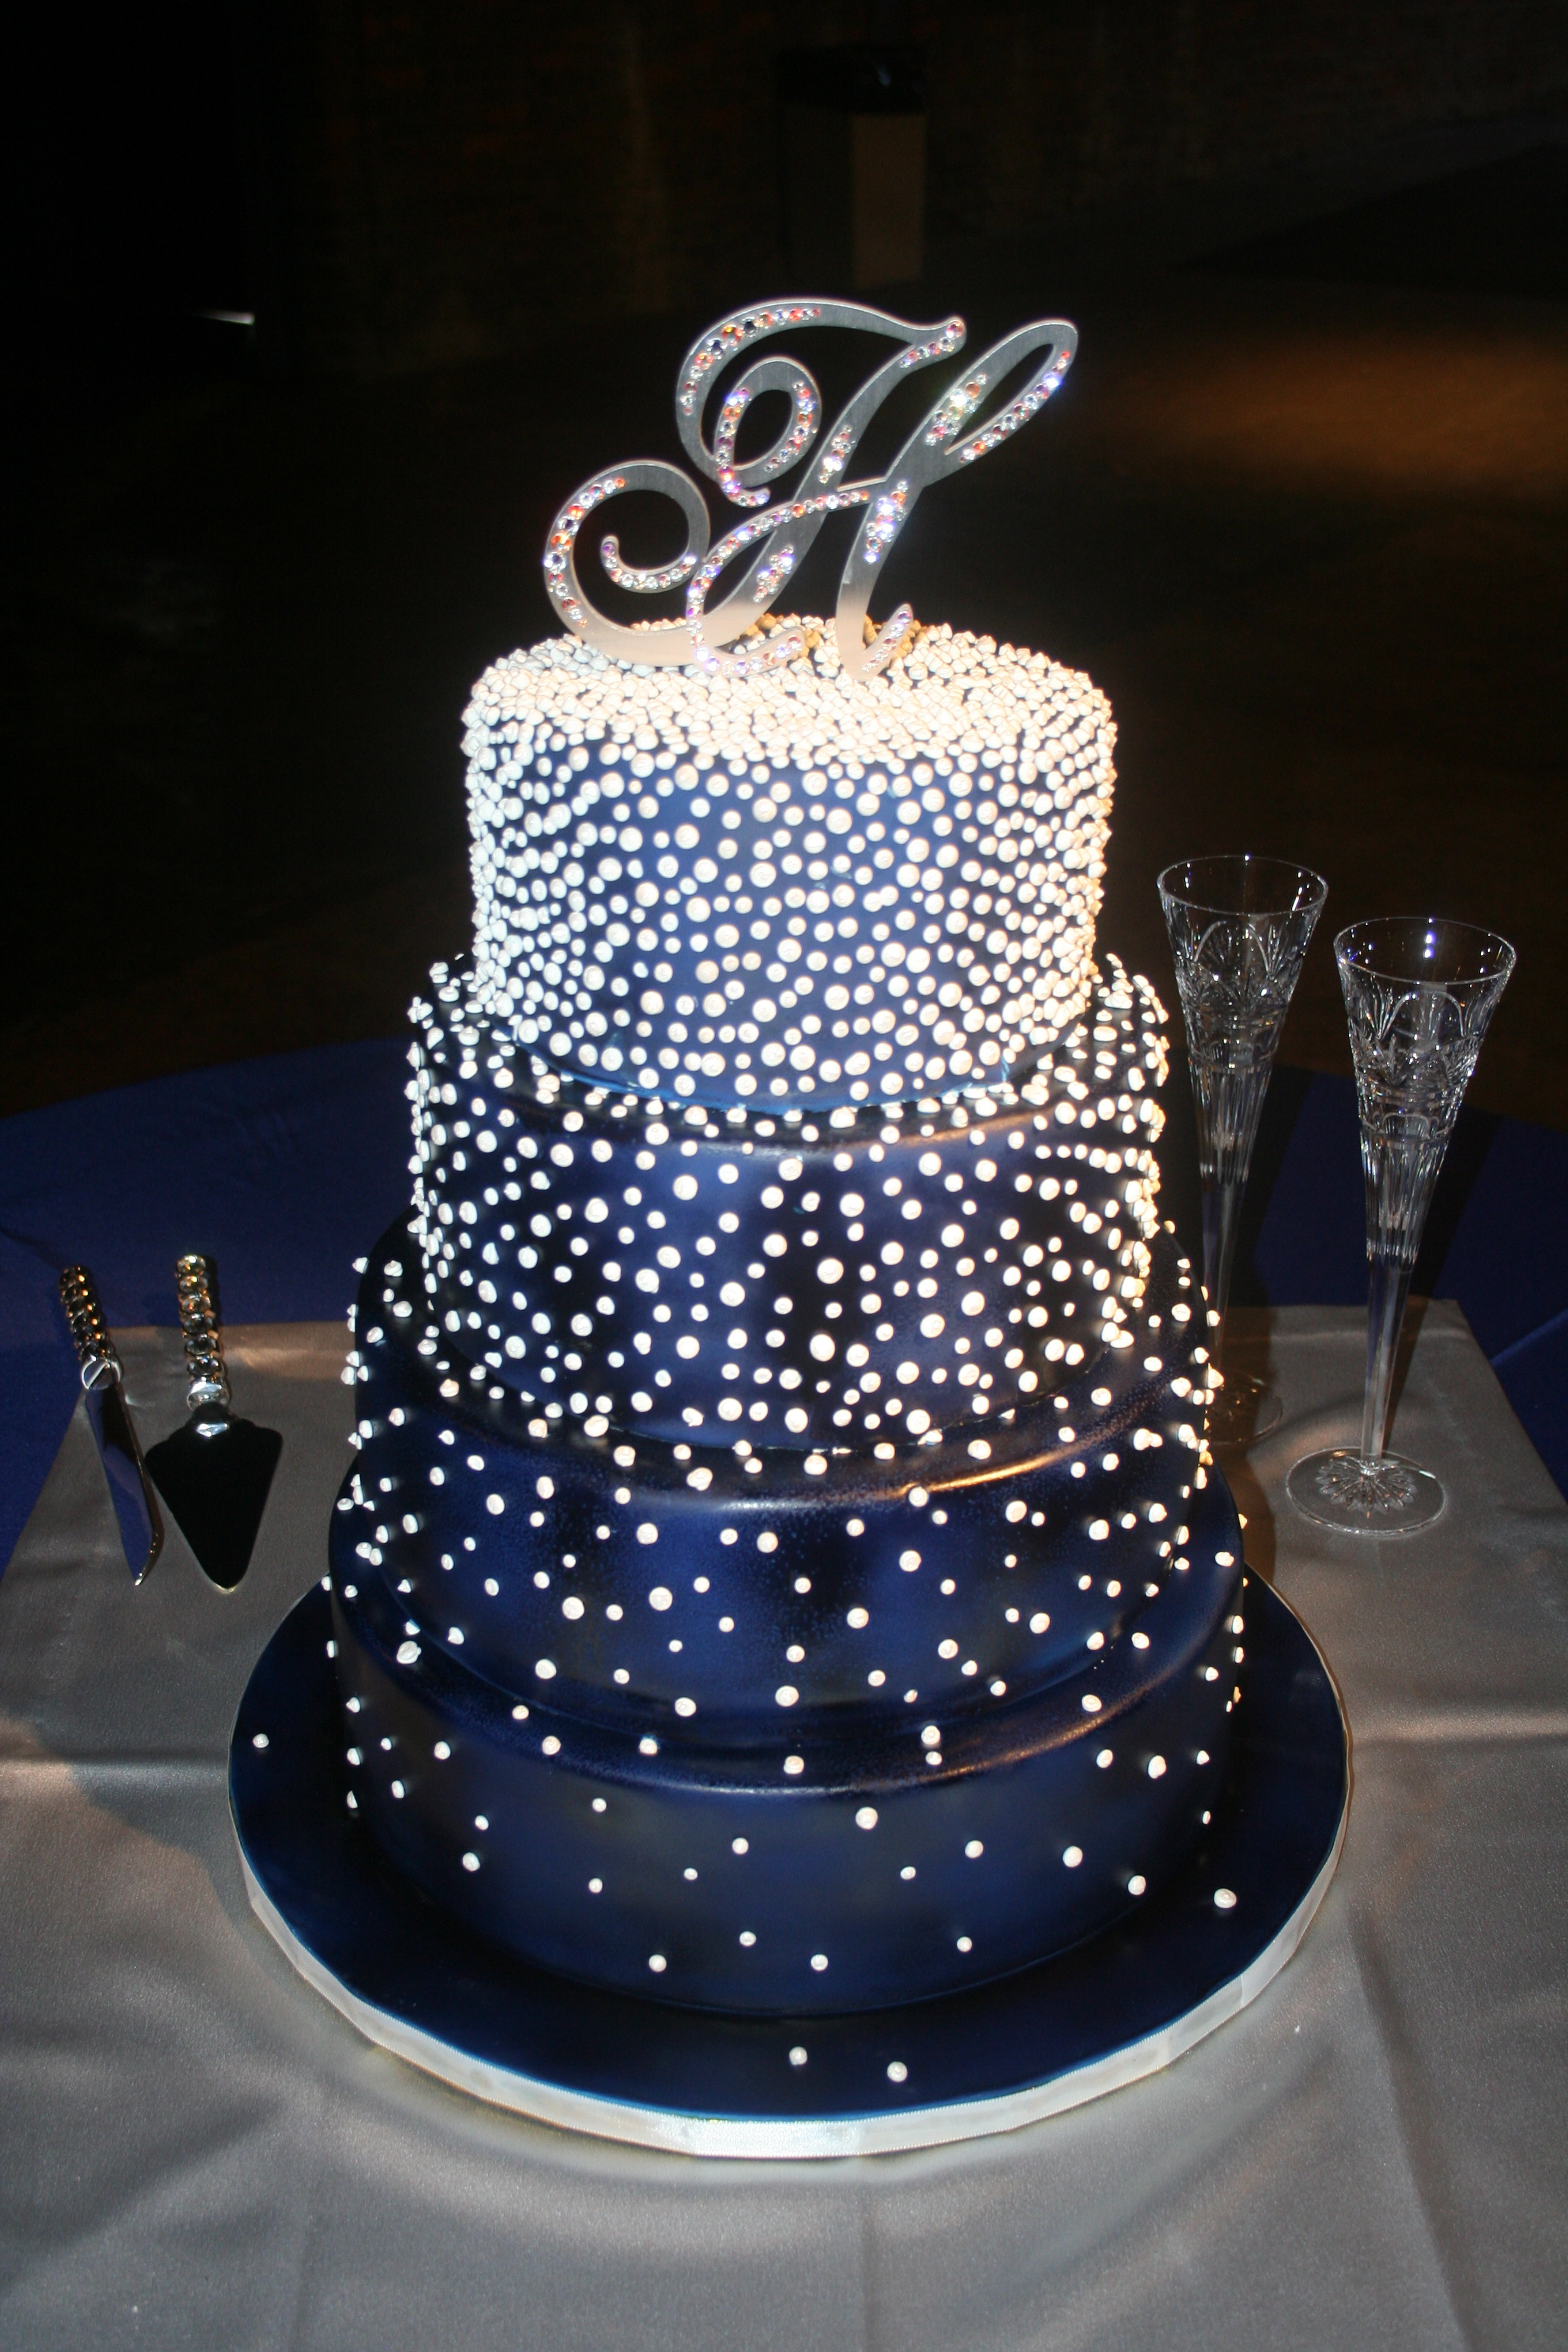 Wedding Cakes With Bling
 10 Wedding Cakes to Inspire You — The Excited Bride